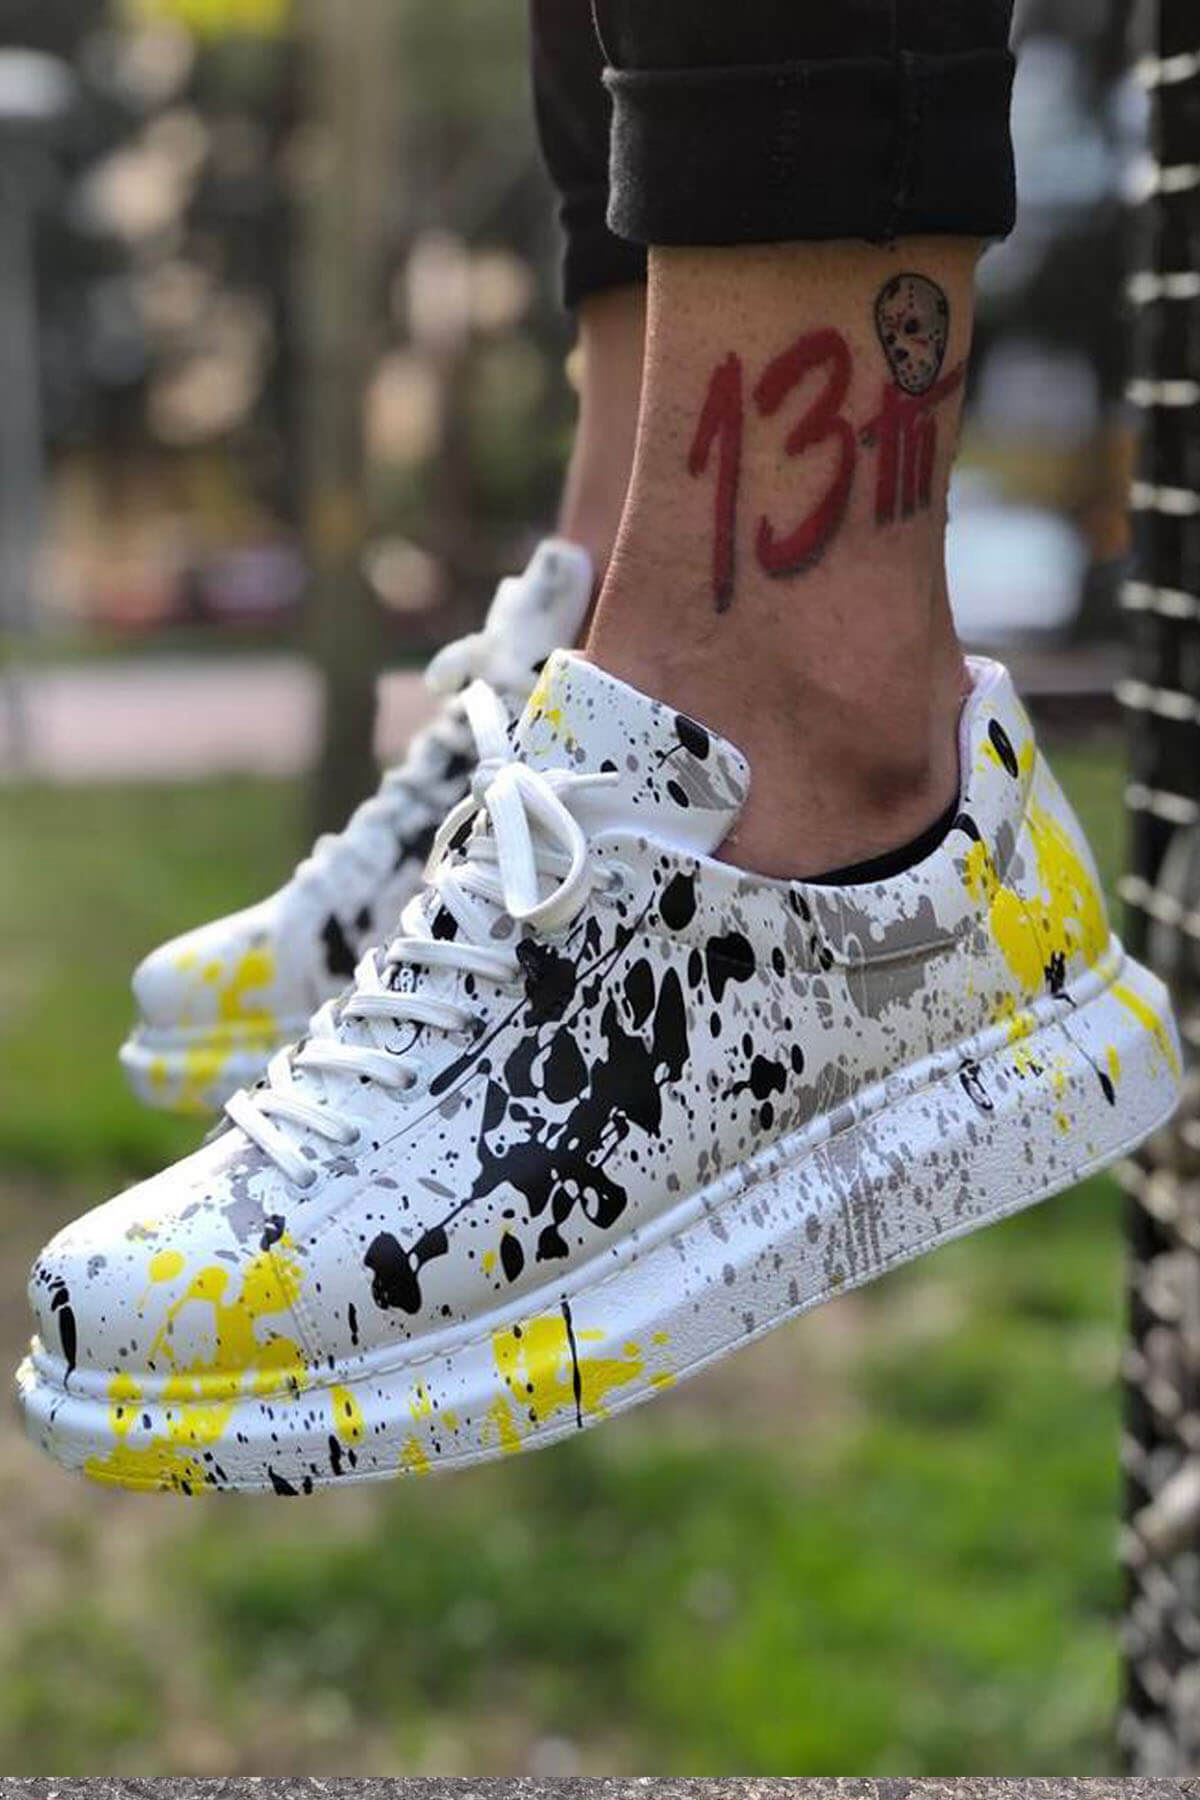 Chekich Men's & Women's Shoes Floral Pattern on White Faux Leather Mixed Color Lace Up Print Summer Unisex Casual Sneakers Comfortable Office University Colorful 2021 Fashion Daily Luxury Sewing Sole Wedding CH255 V7